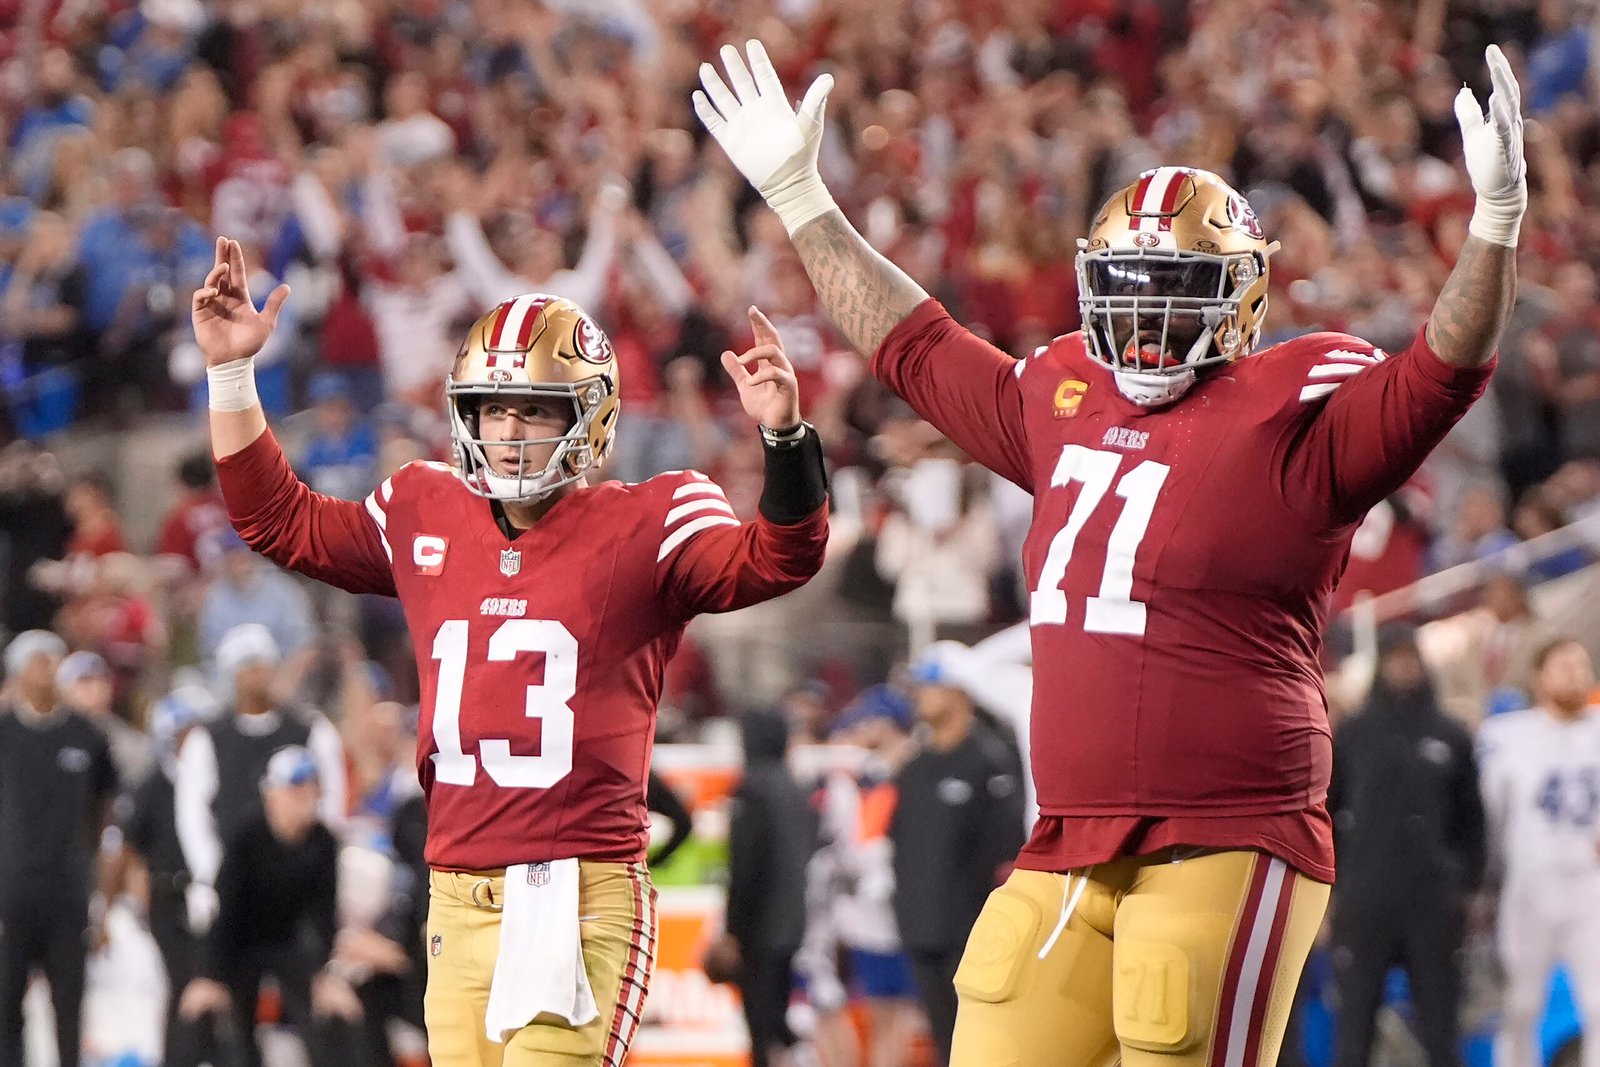 49ers rally past Lions, advance to Super Bowl vs Chiefs